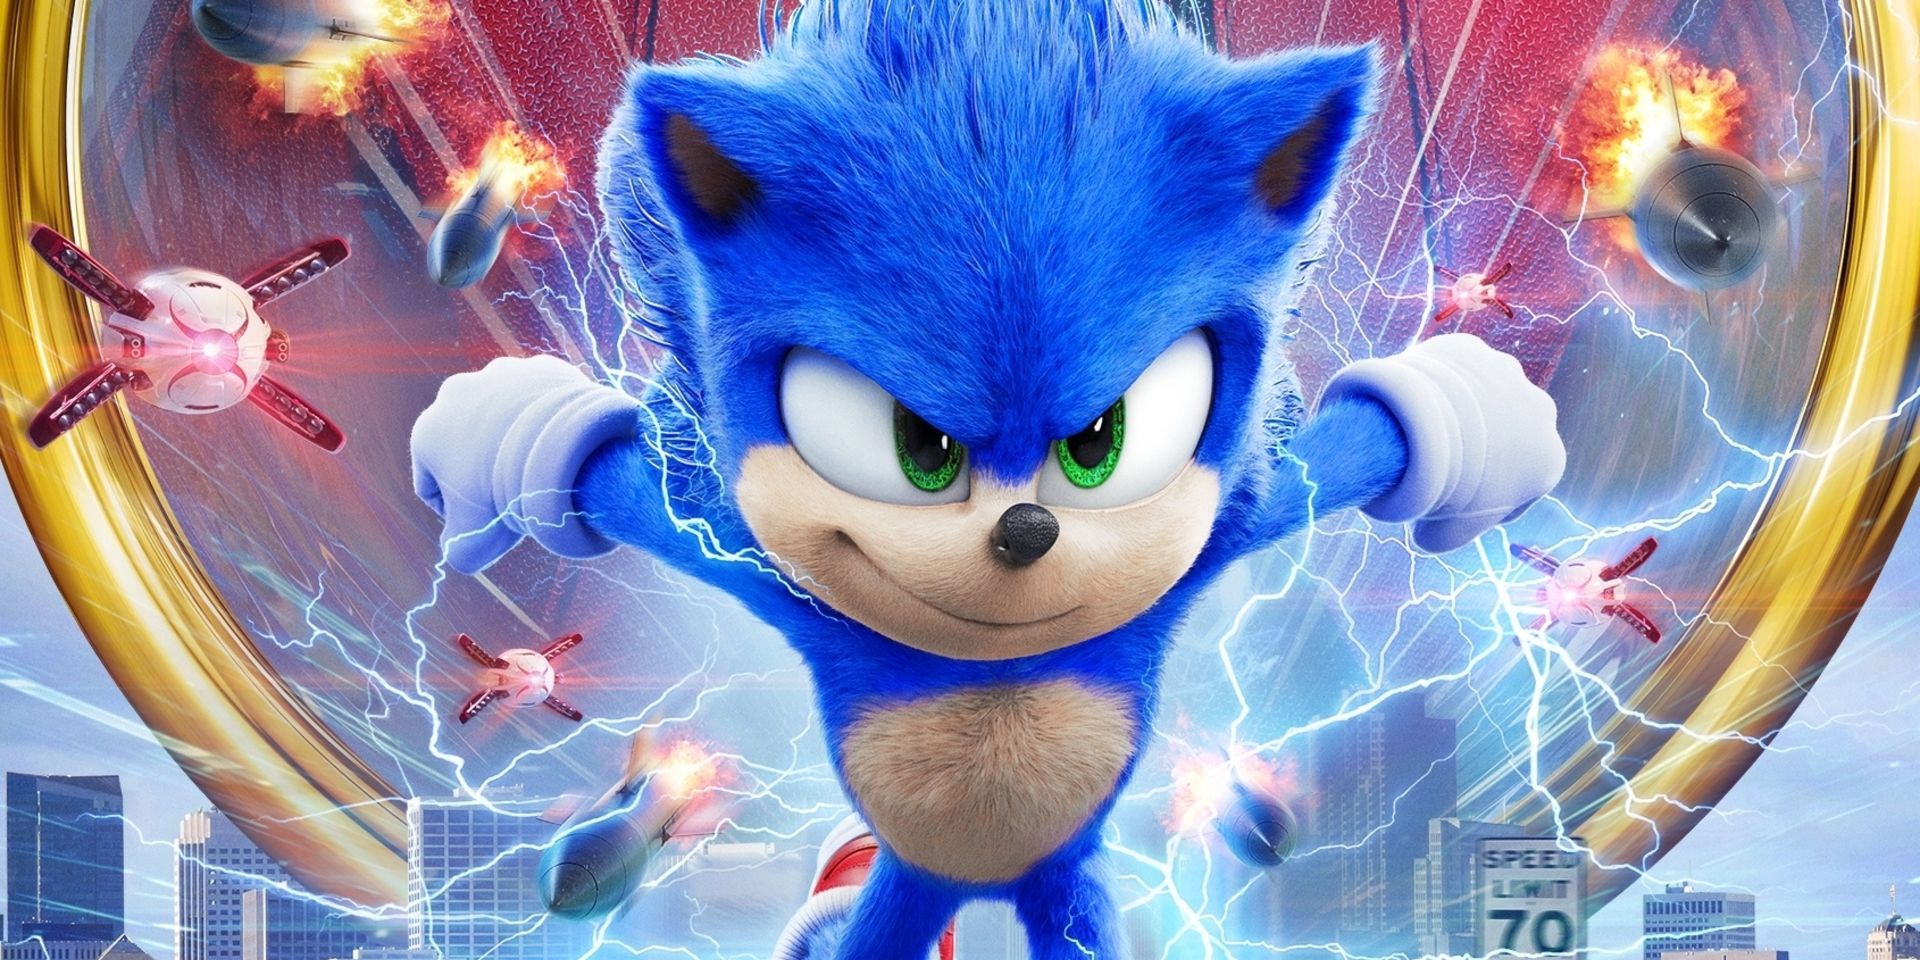 Sonic 5- The Movie Trailer 